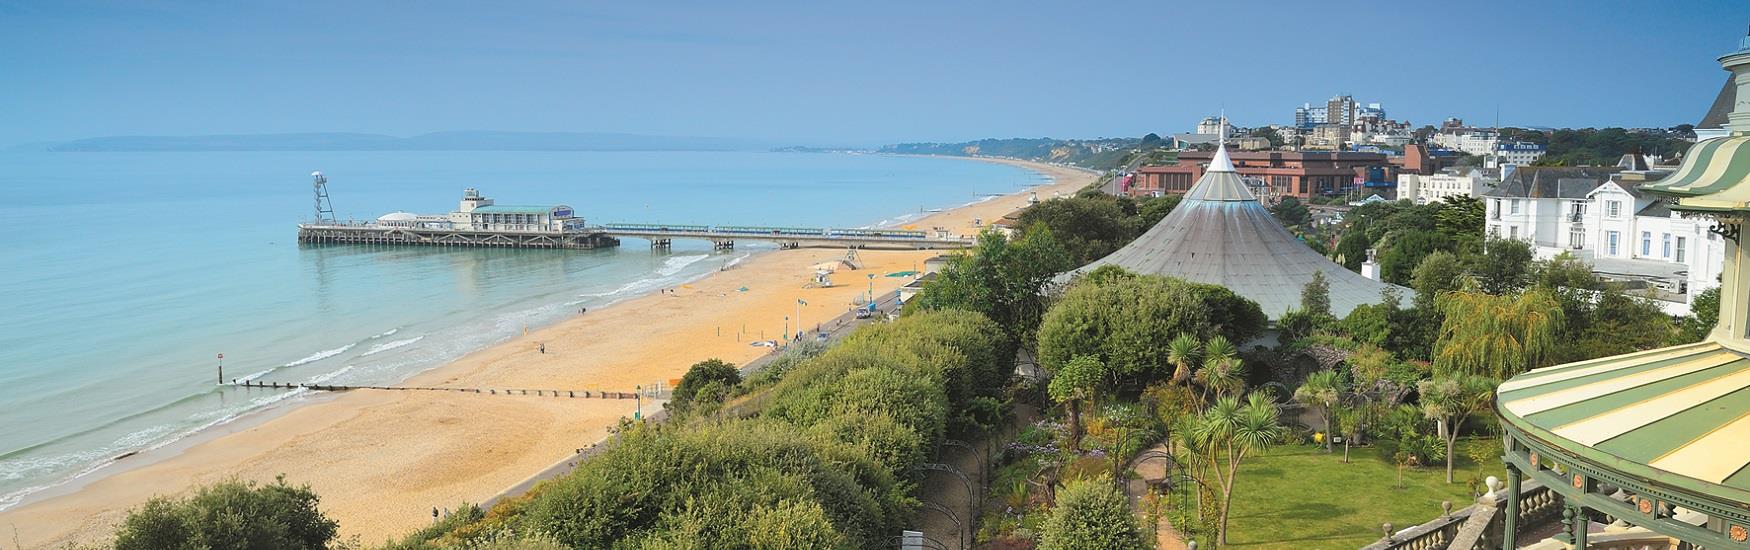 Views in Bournemouth